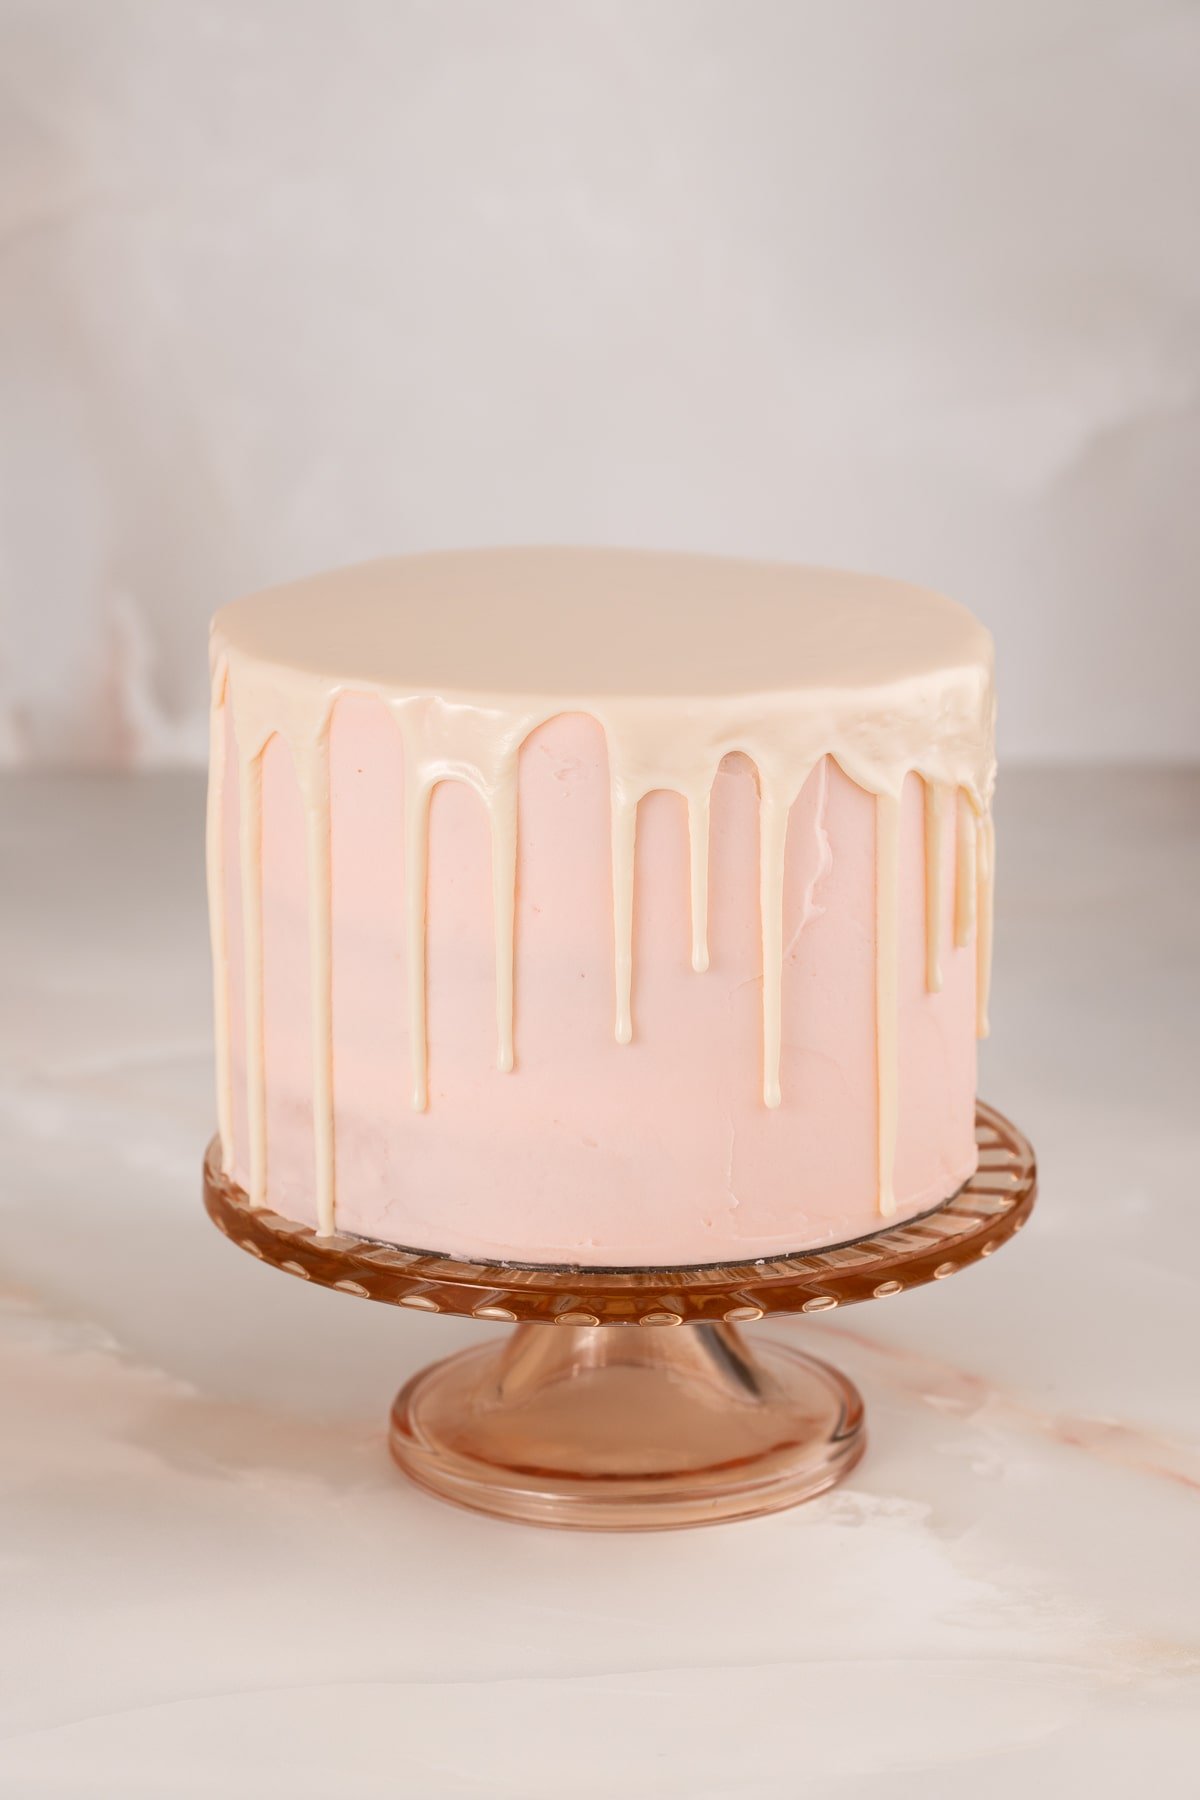 cake icing ideas techniques